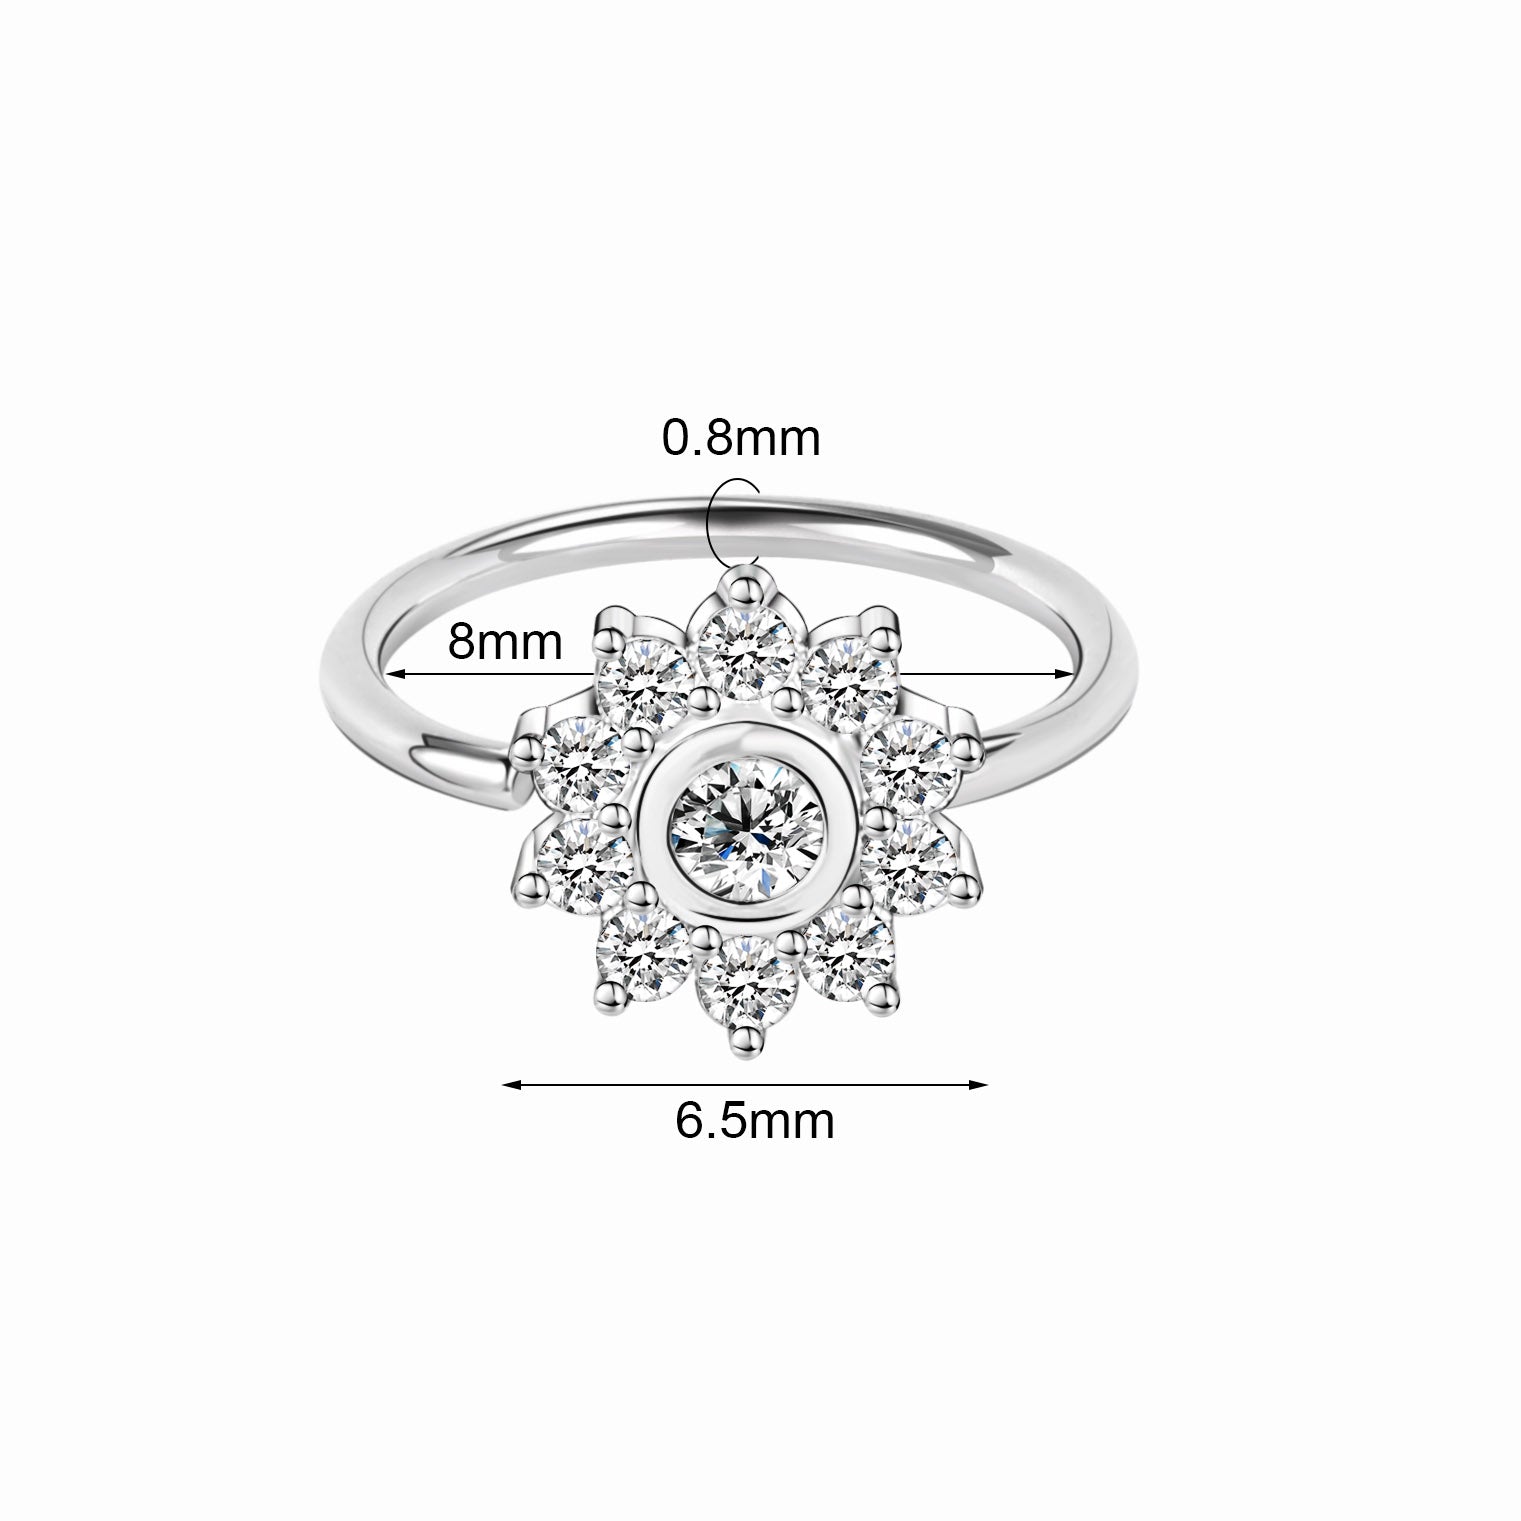 20g-flower-crystal-nose-ring-soft-wire-helix-cartilage-piercing